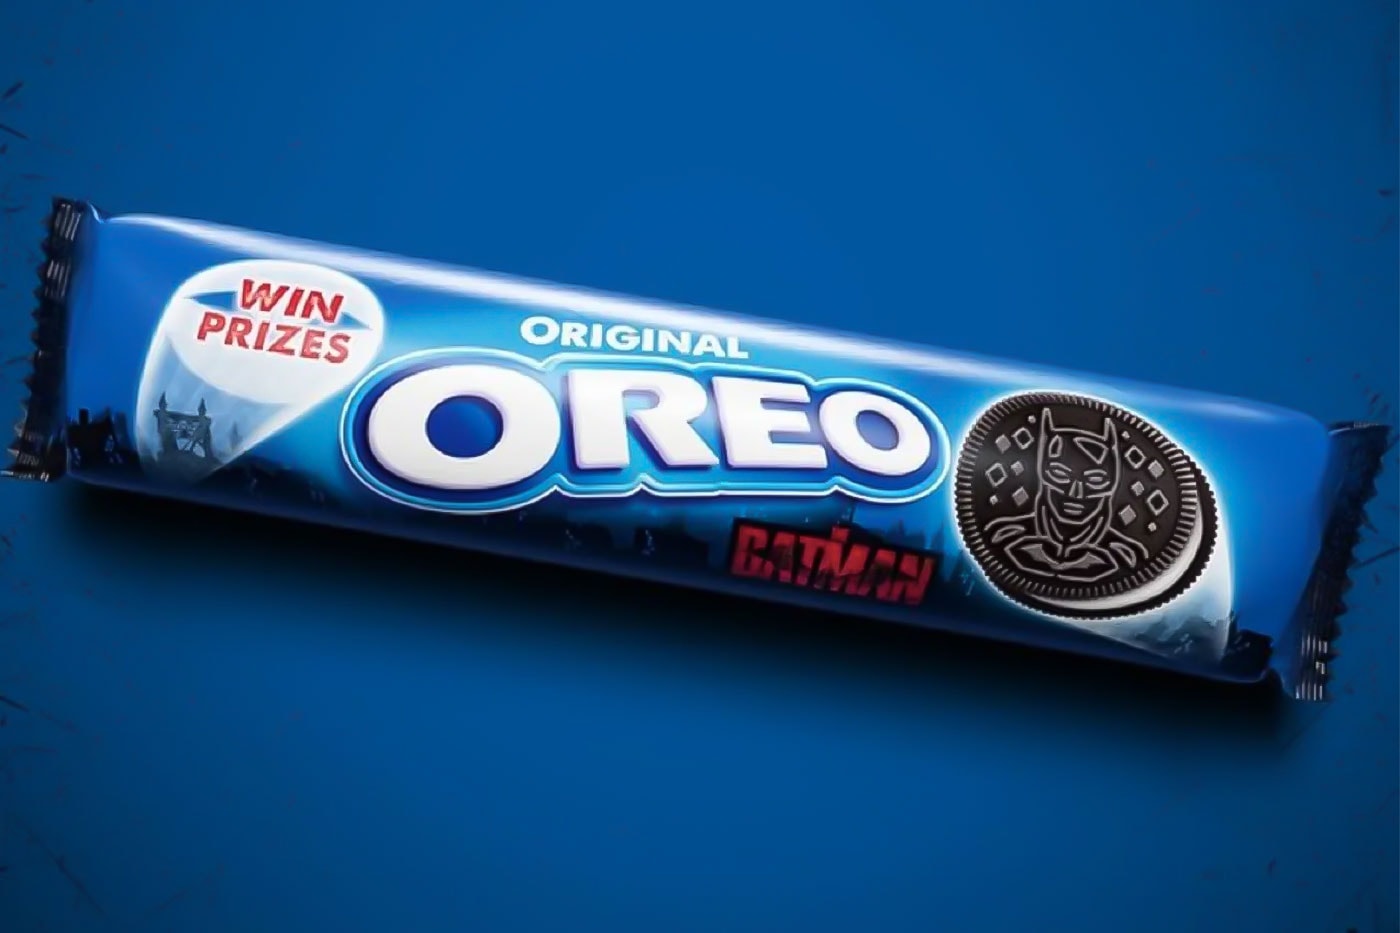 Oreo to Launch Limited-Edition The Batman Cookies film robert pattison march 4 batcave puzzles canada release info news